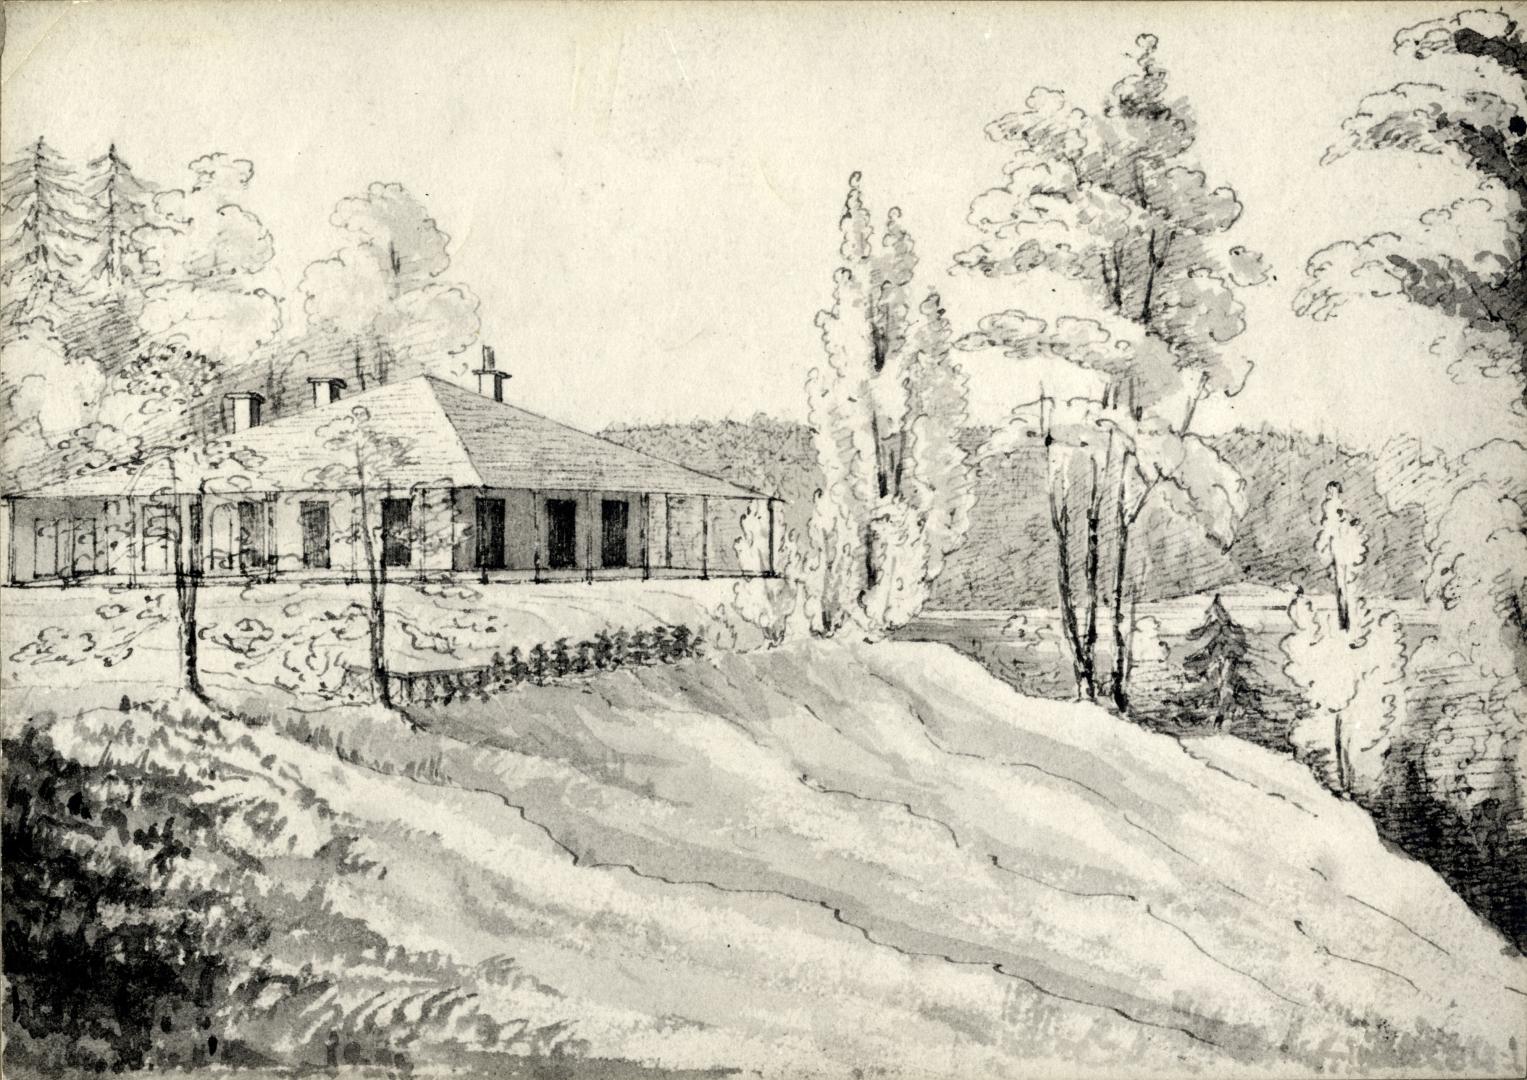 Image shows a house with some trees around in winter.